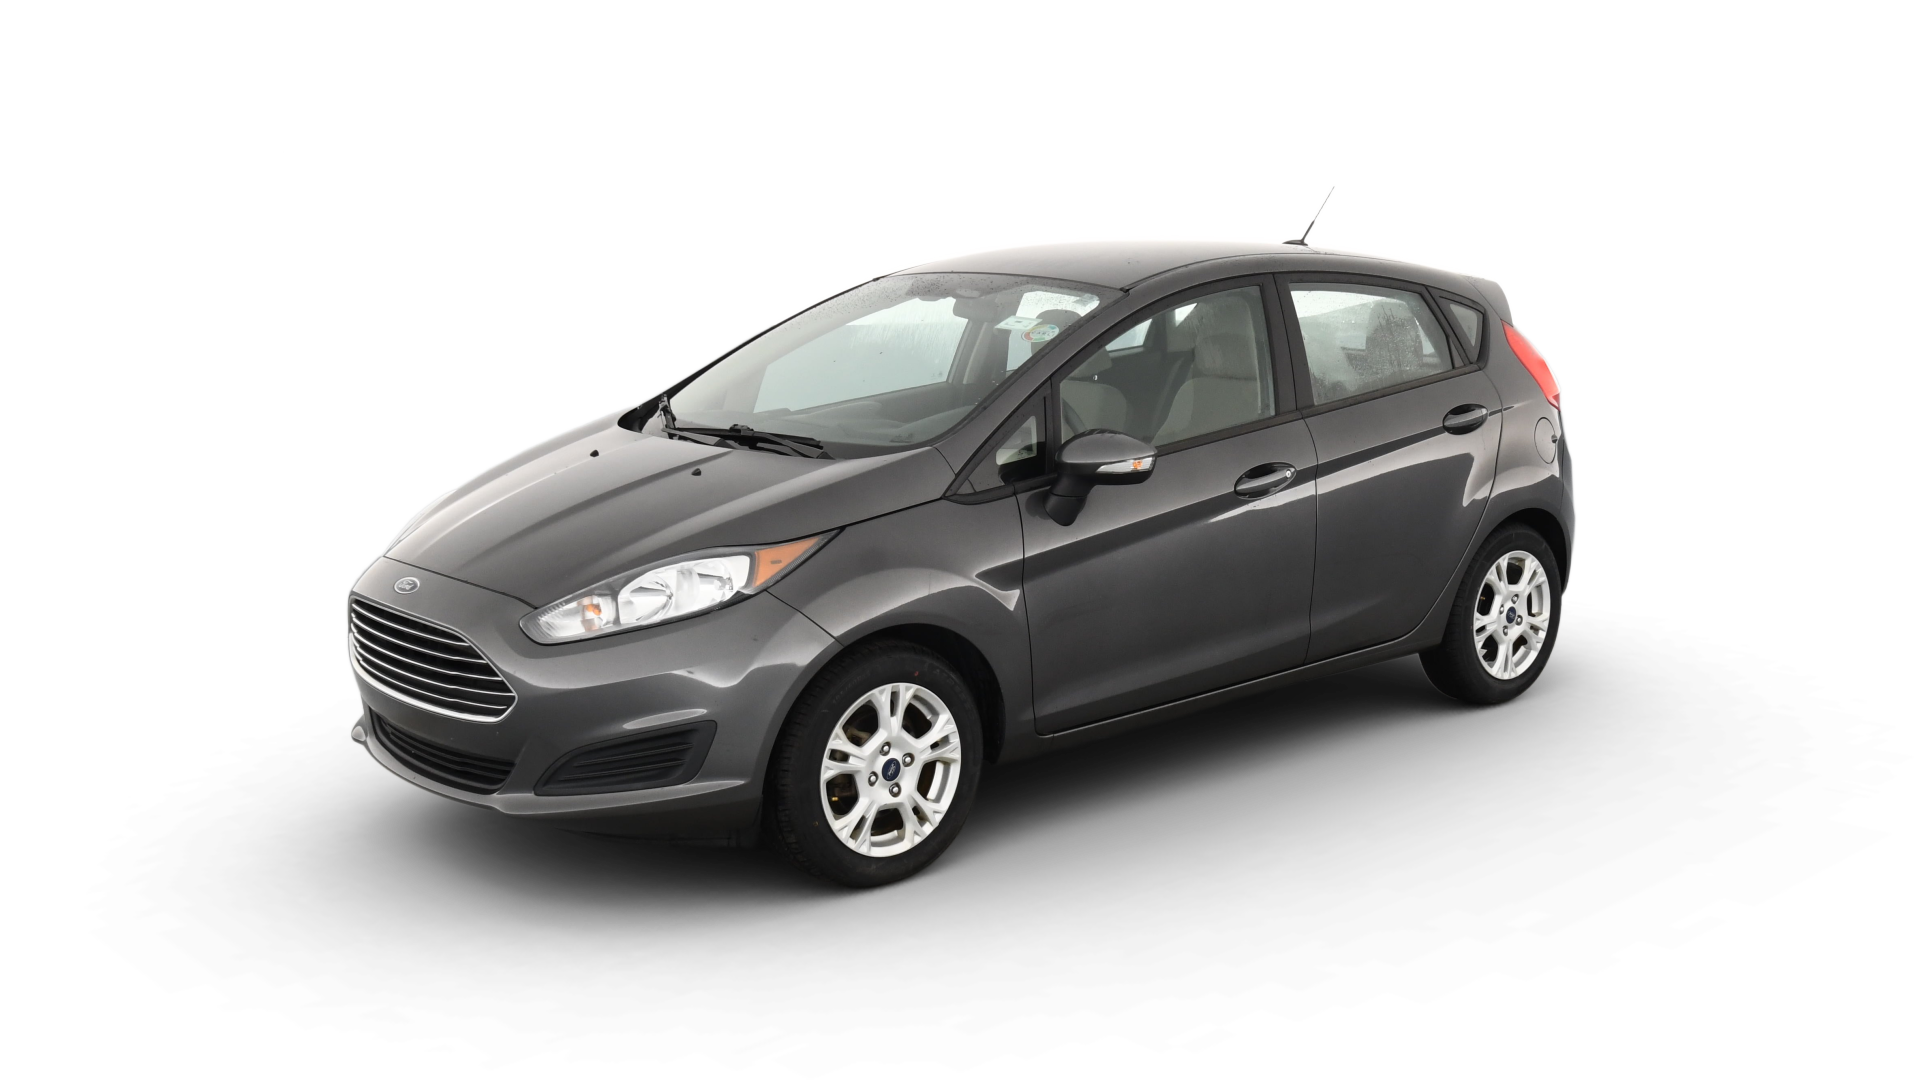 Used 2015 Ford Fiesta For Sale Online | Carvana